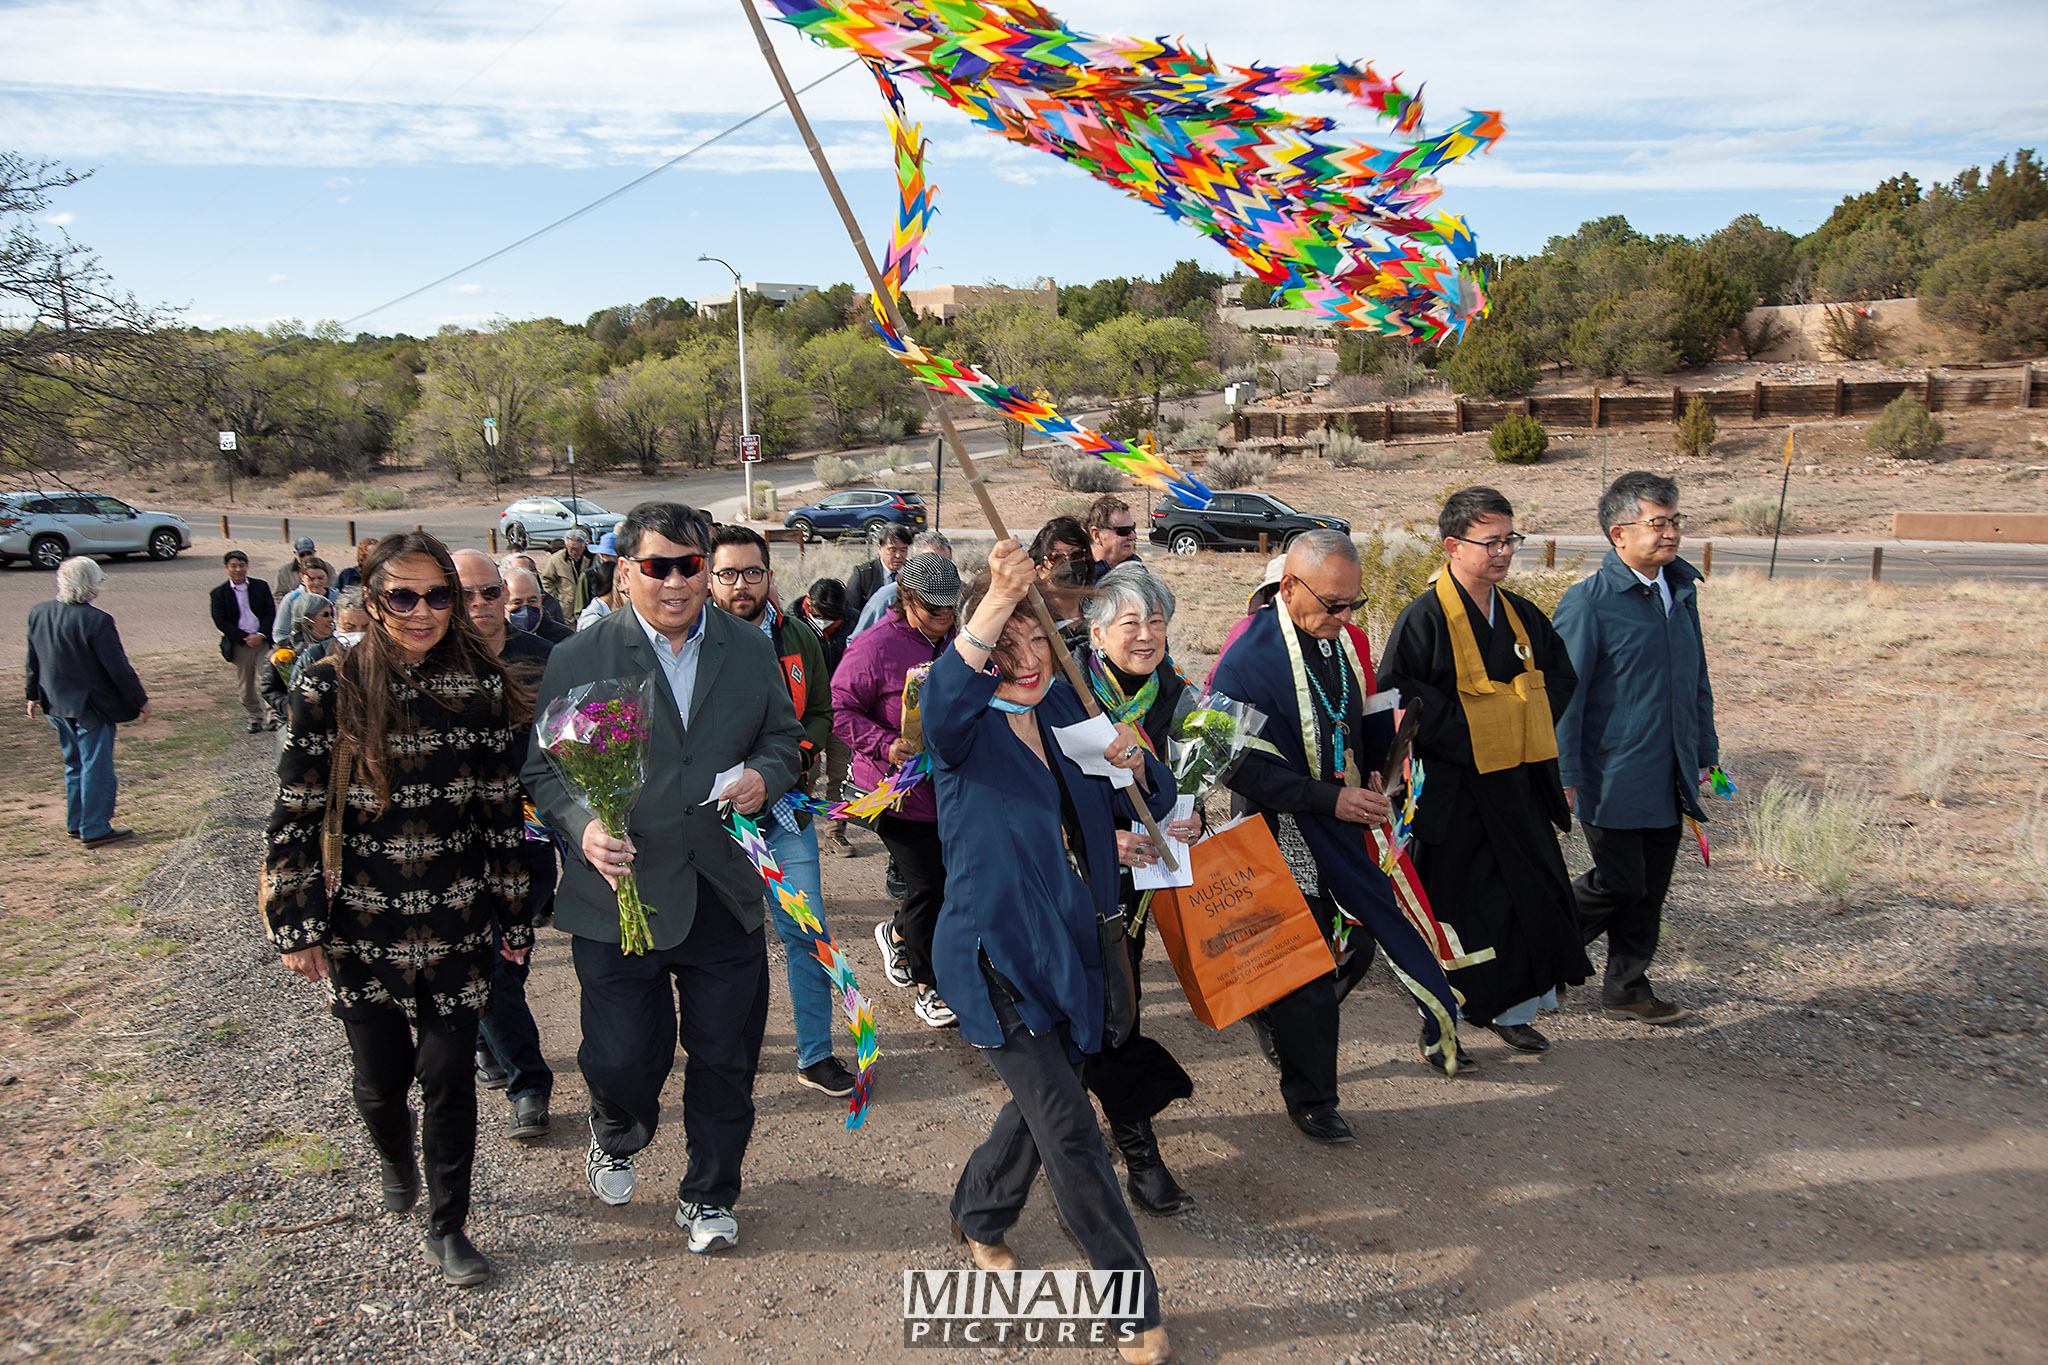 Descendents of Santa Fe Internment Camp prisoners, historians and friends commemorate the fifteenth anniversary of the marker dedication at the Santa Fe Internment Camp Saturday, April 23, 2022.